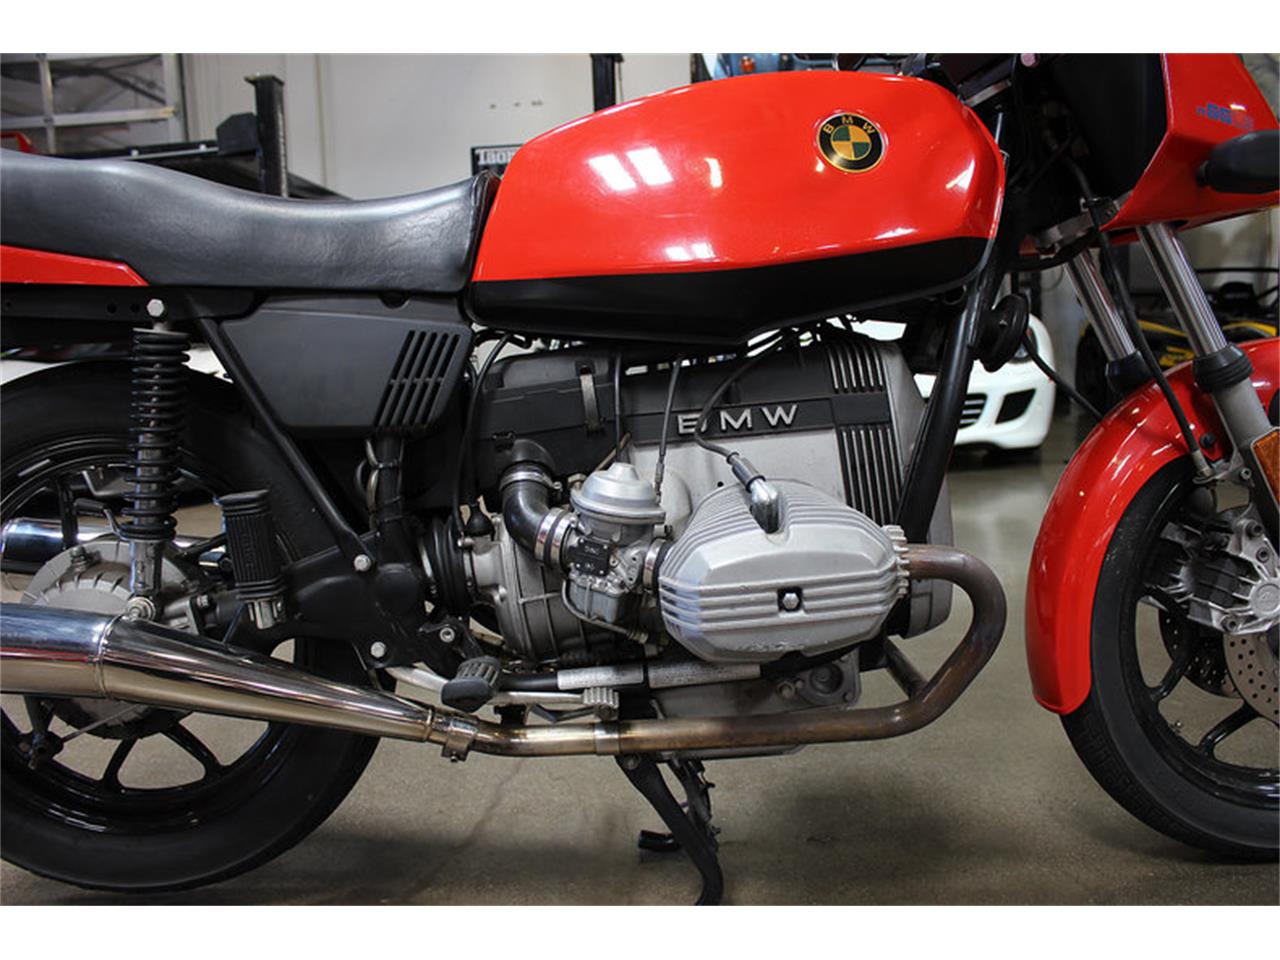 1982 BMW Motorcycle for Sale | ClassicCars.com | CC-1082051